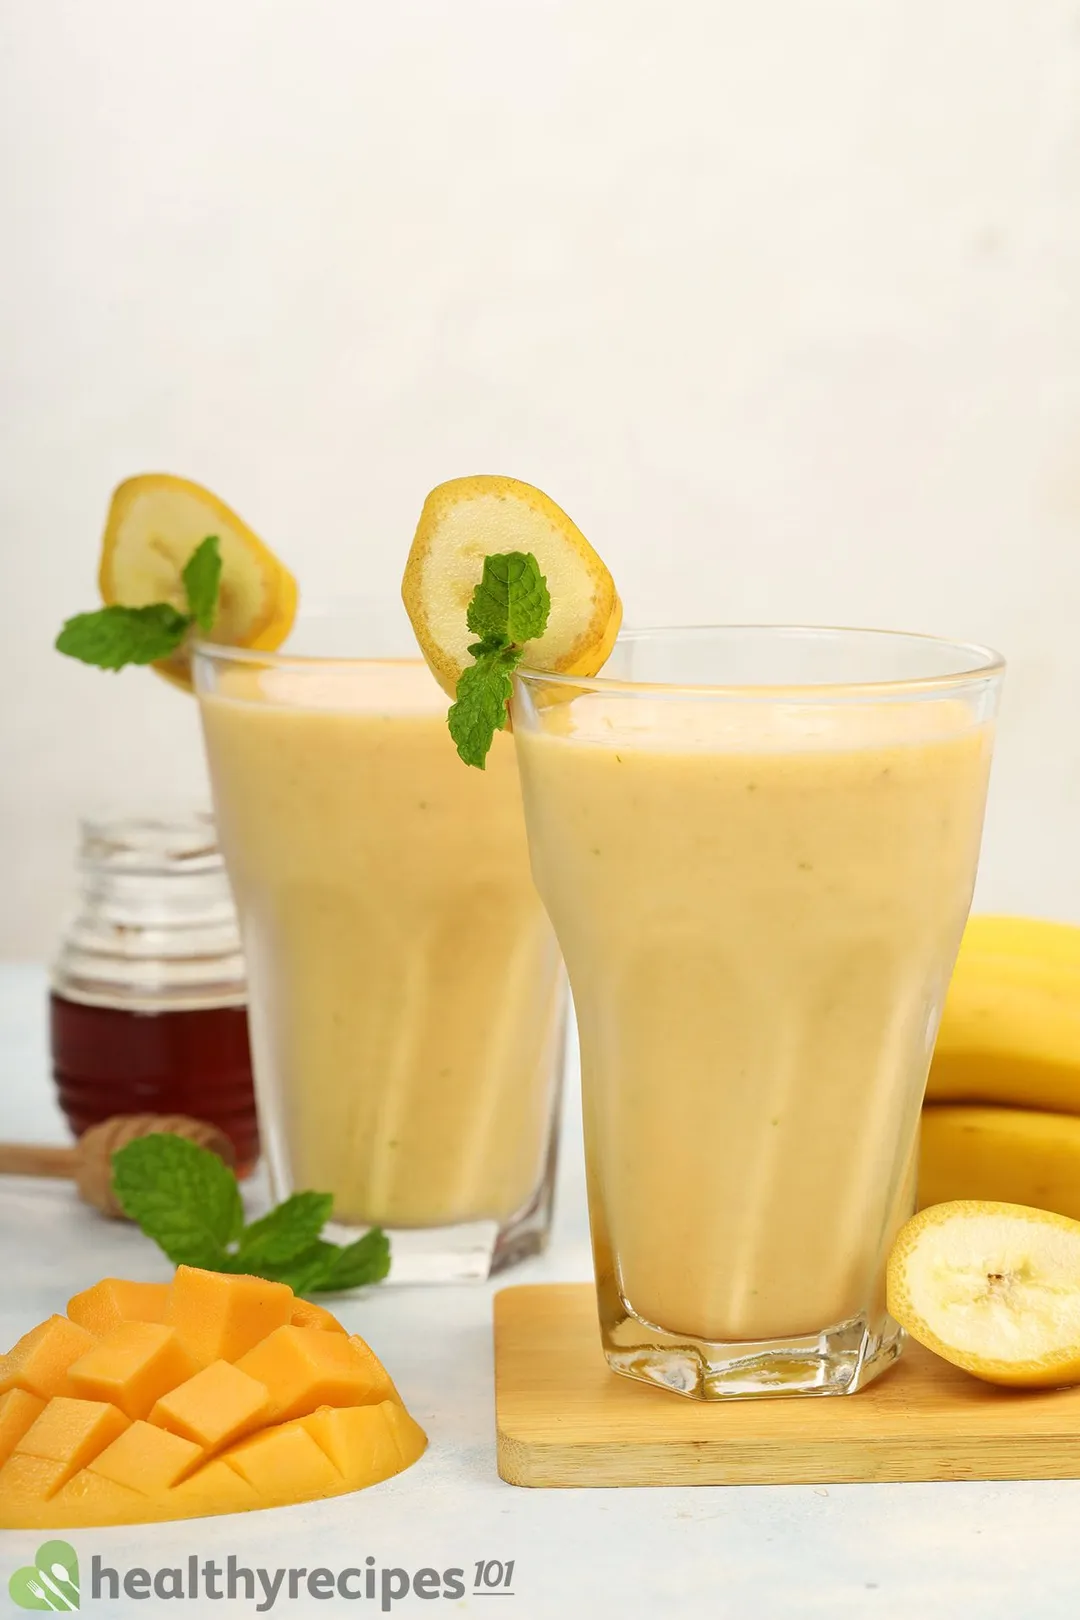 Two glasses of Mango Banana Smoothie placed near a scored mango, sliced bananas, mint leaves, and a small jar of honey.